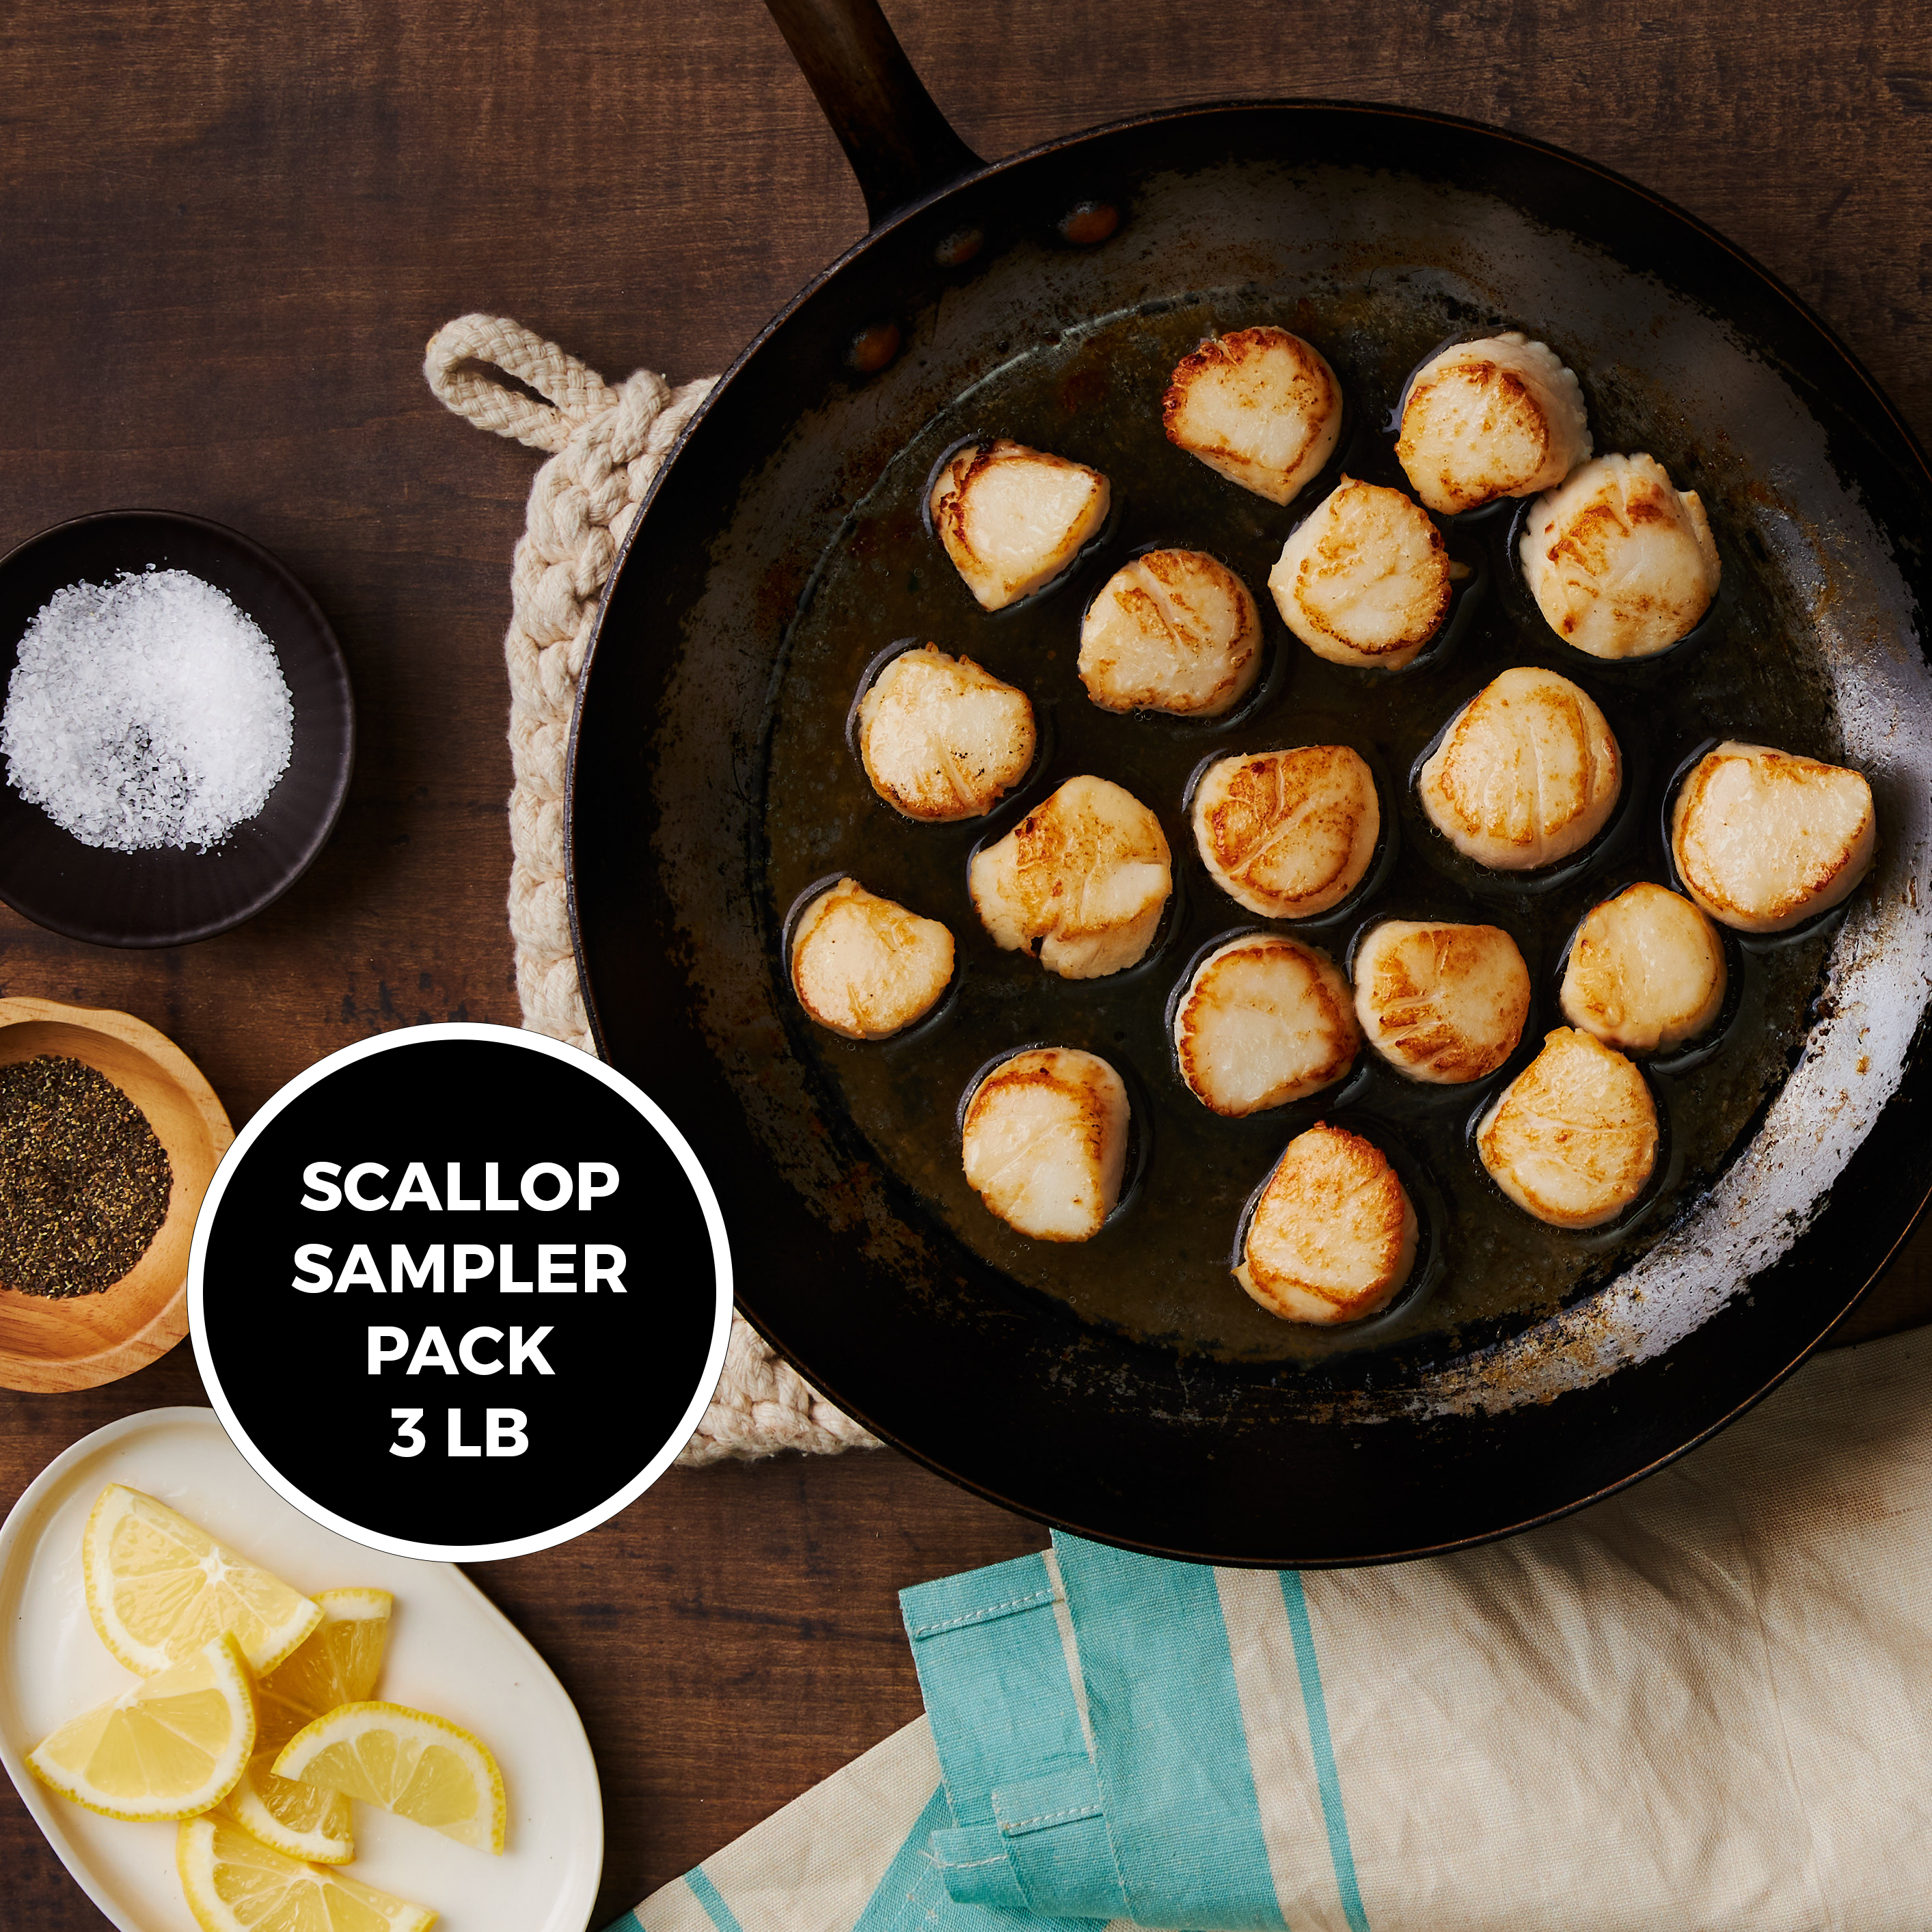 This Image shows 18 Maine Dayboat scallops freshly cooked in a cast iron pan, surrounded by a dishcloth, salt and pepper and lemon wedges.